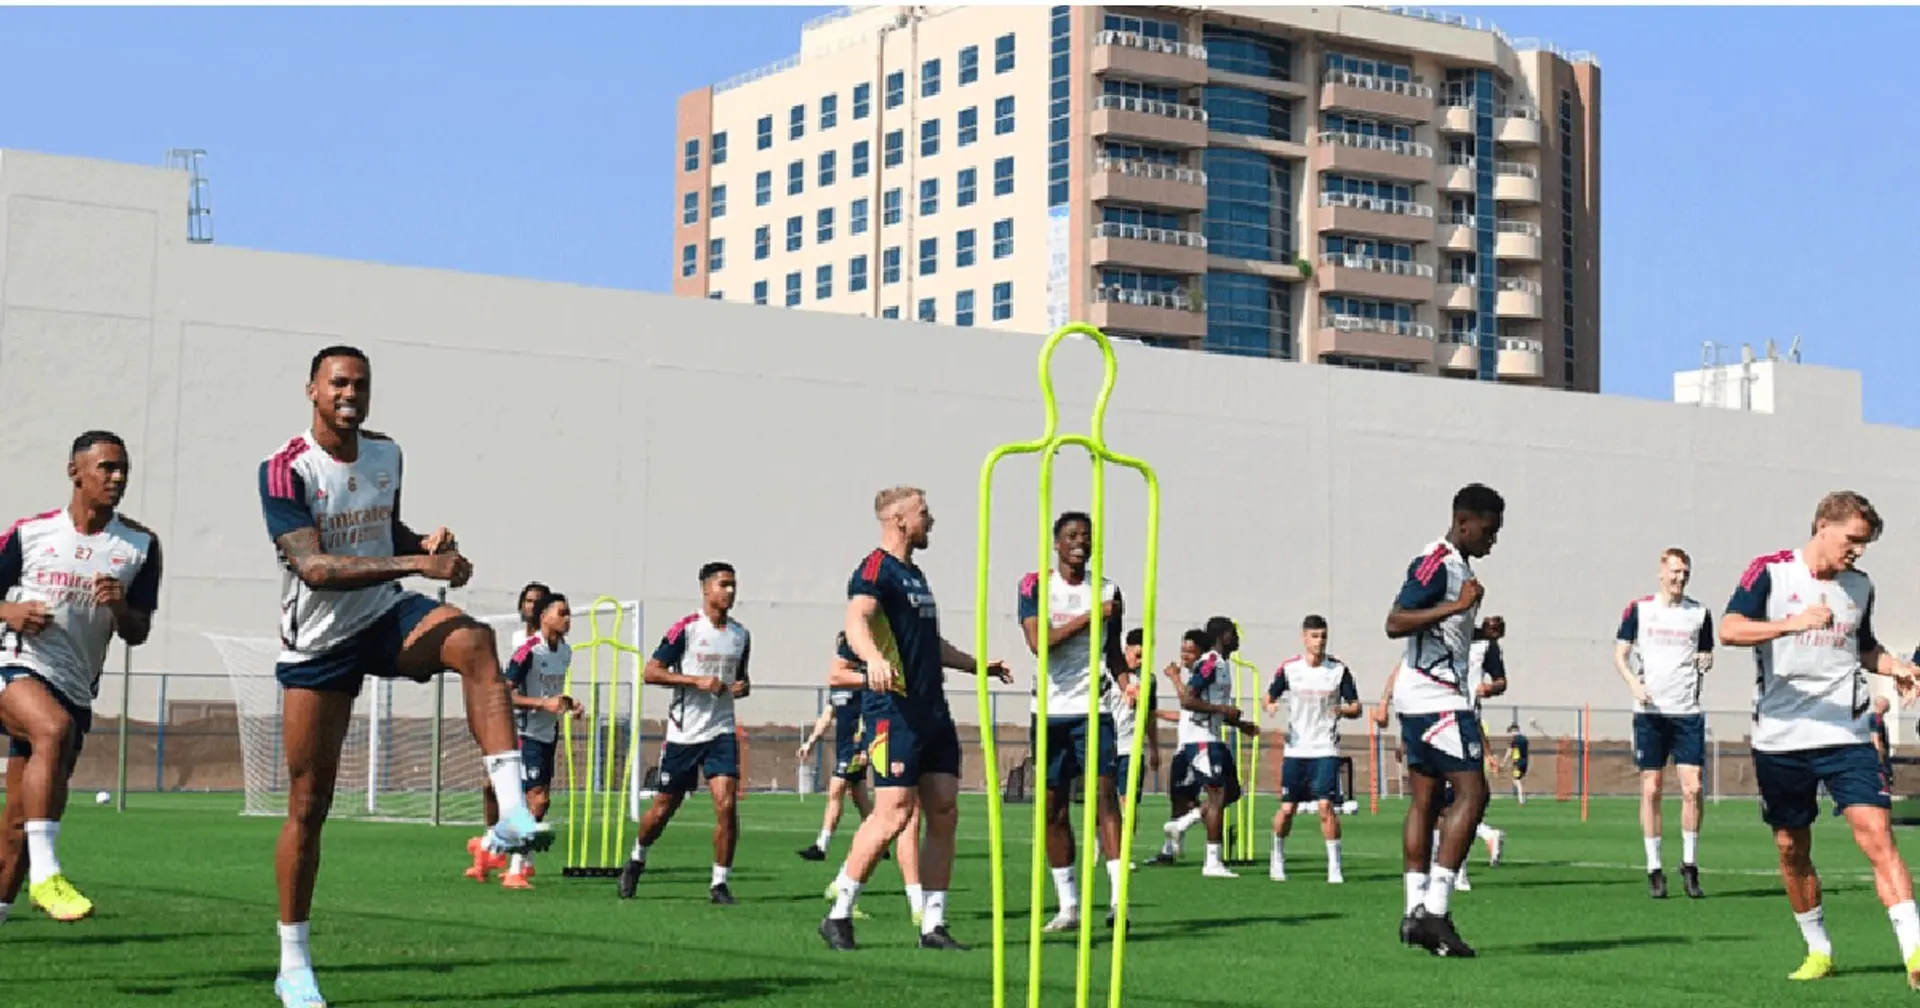 4 best pictures from Arsenal's first training session in Dubai 